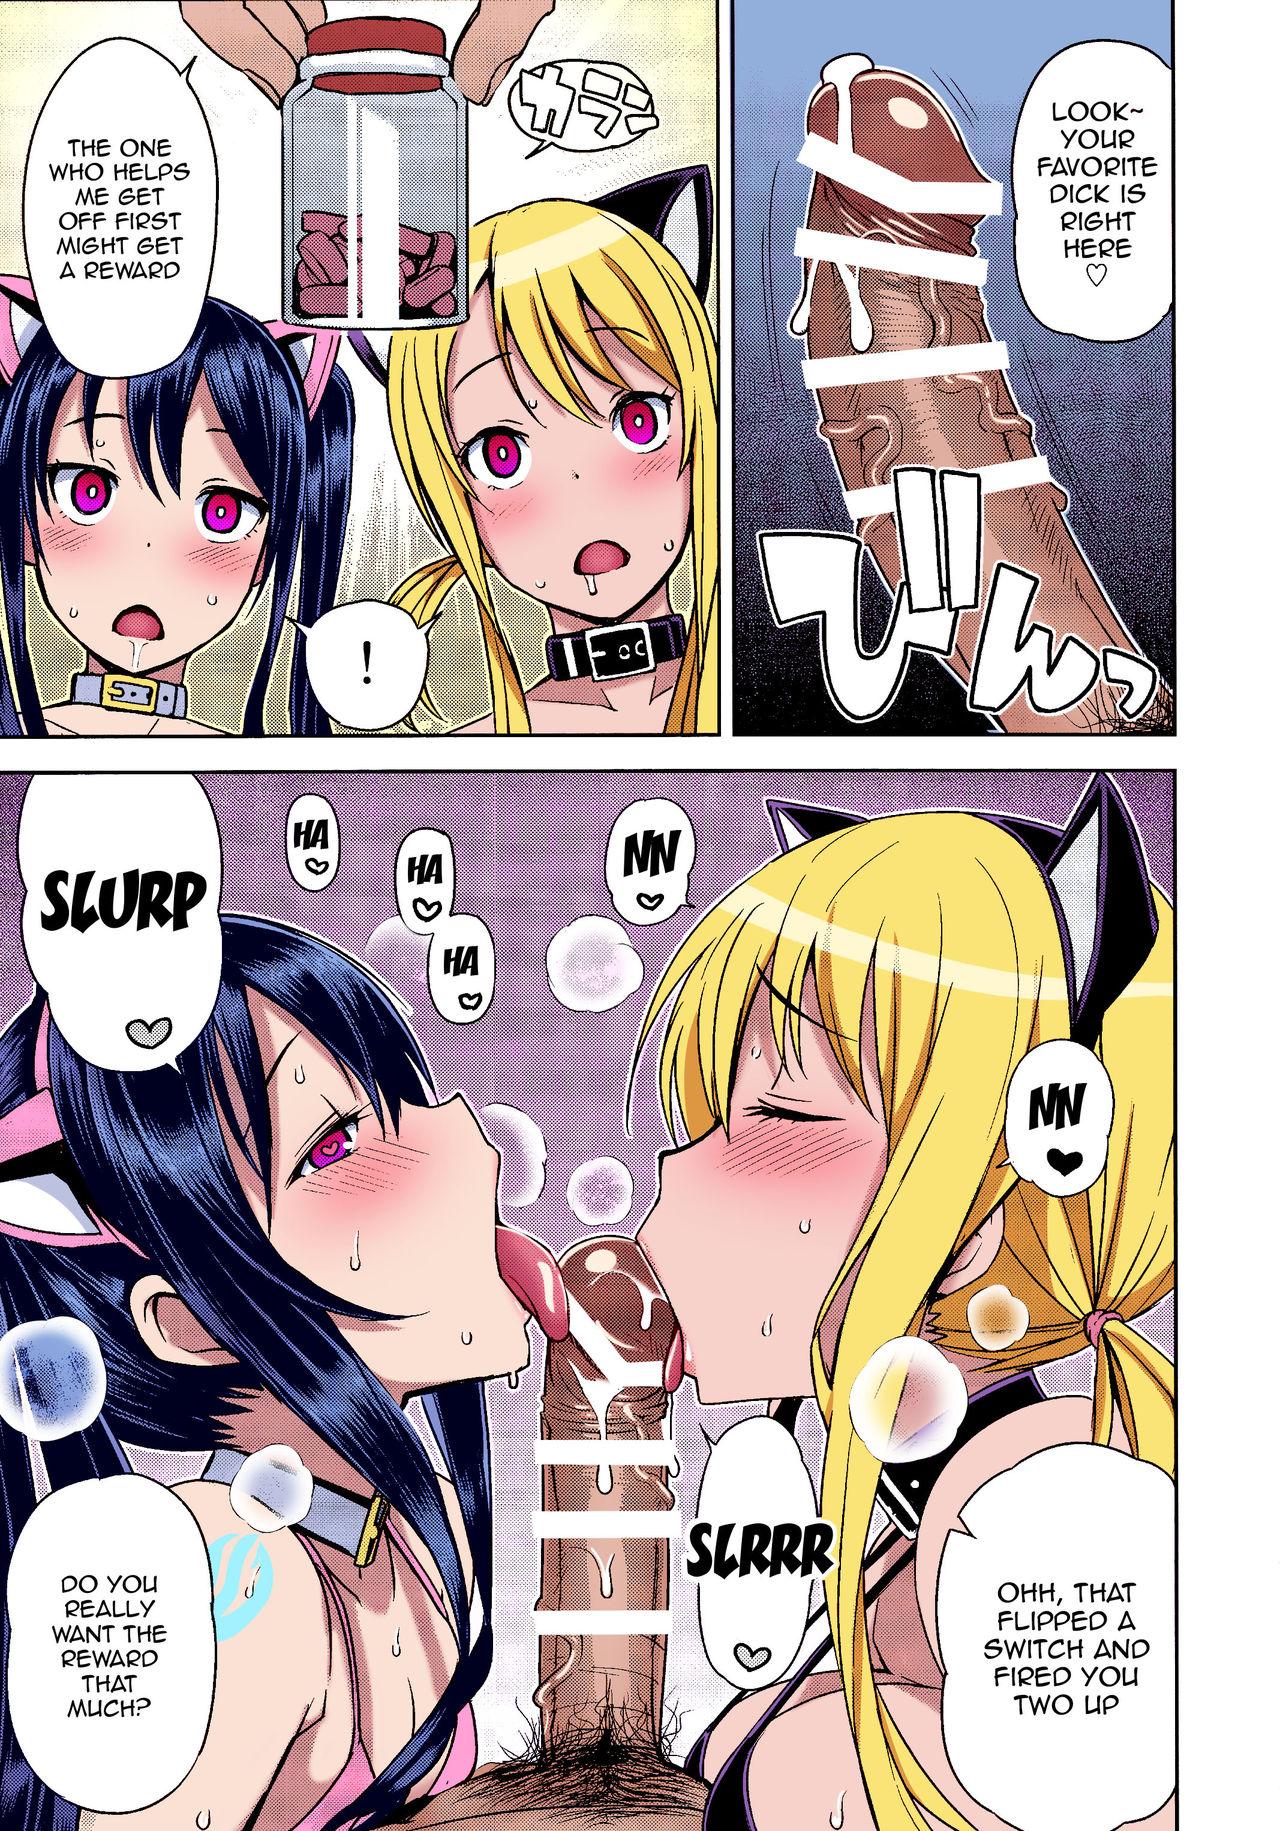 Gay Boyporn Chichikko Bitch 2 - Witch Bitch Collection Vol.1 VERSION - Fairy tail Top - Page 4